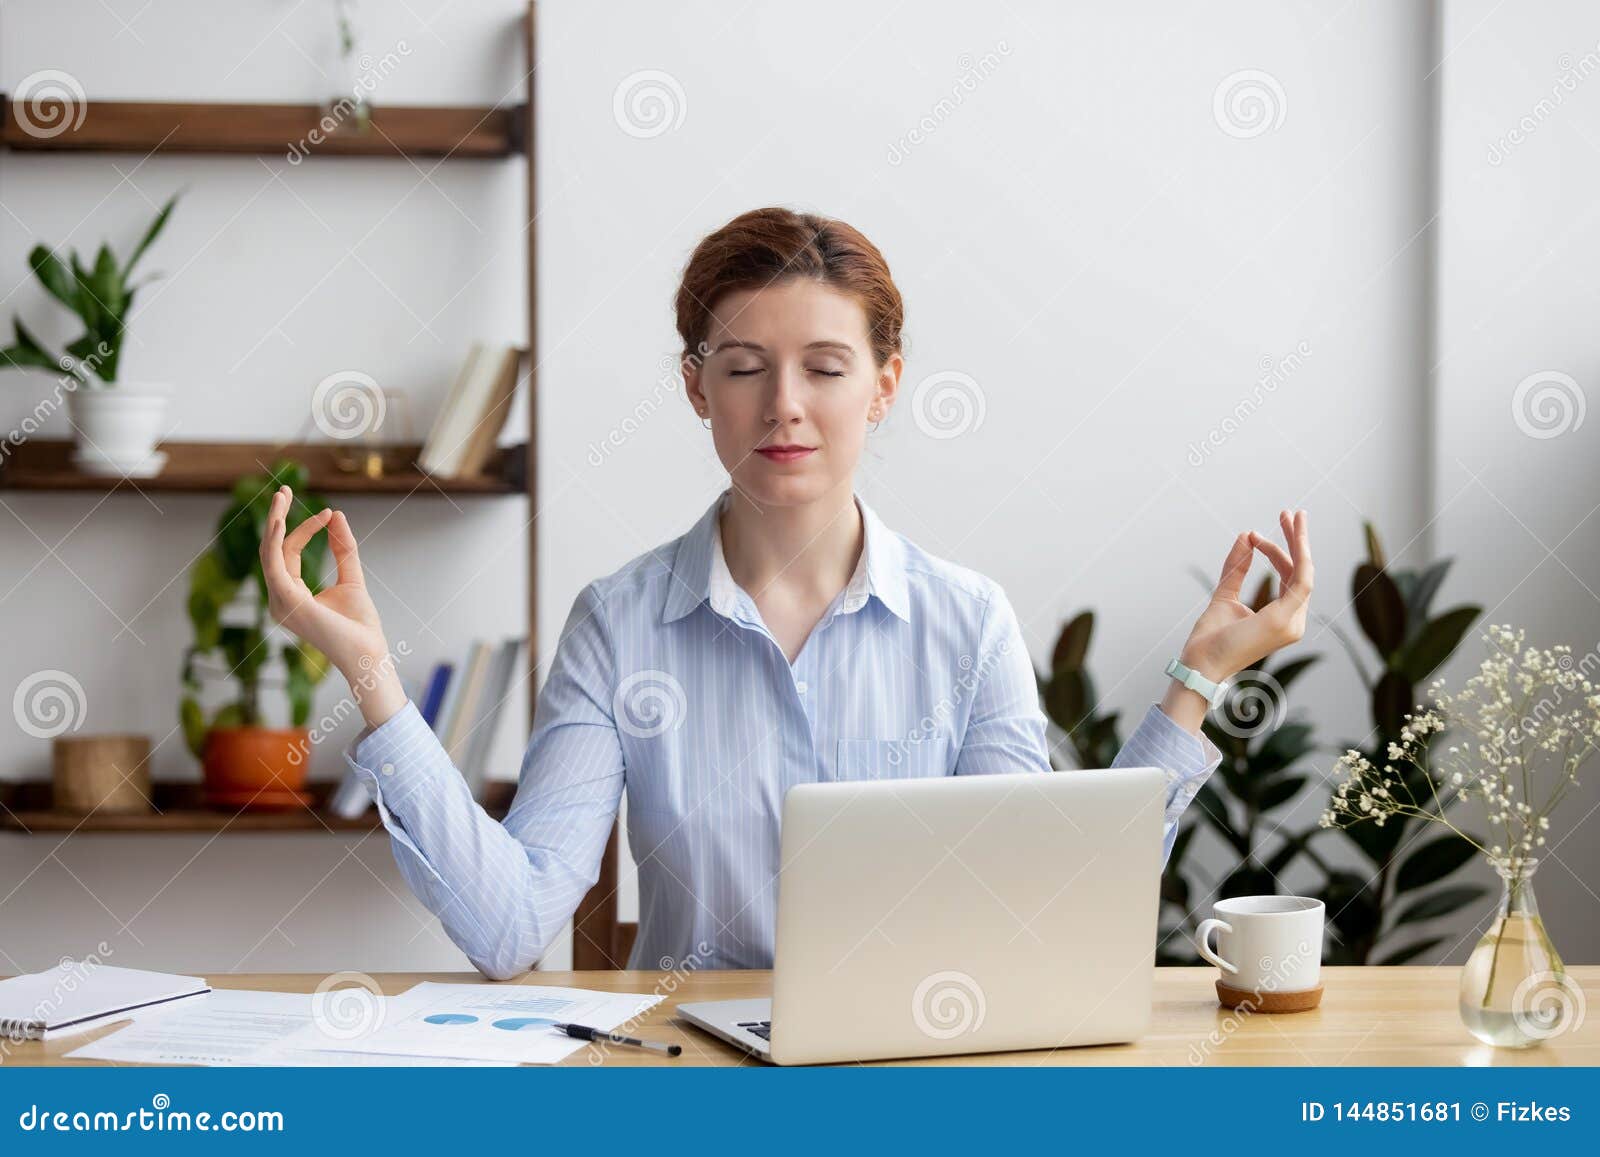 Calm Healthy Business Woman Meditate Relaxing At Office Desk Stock